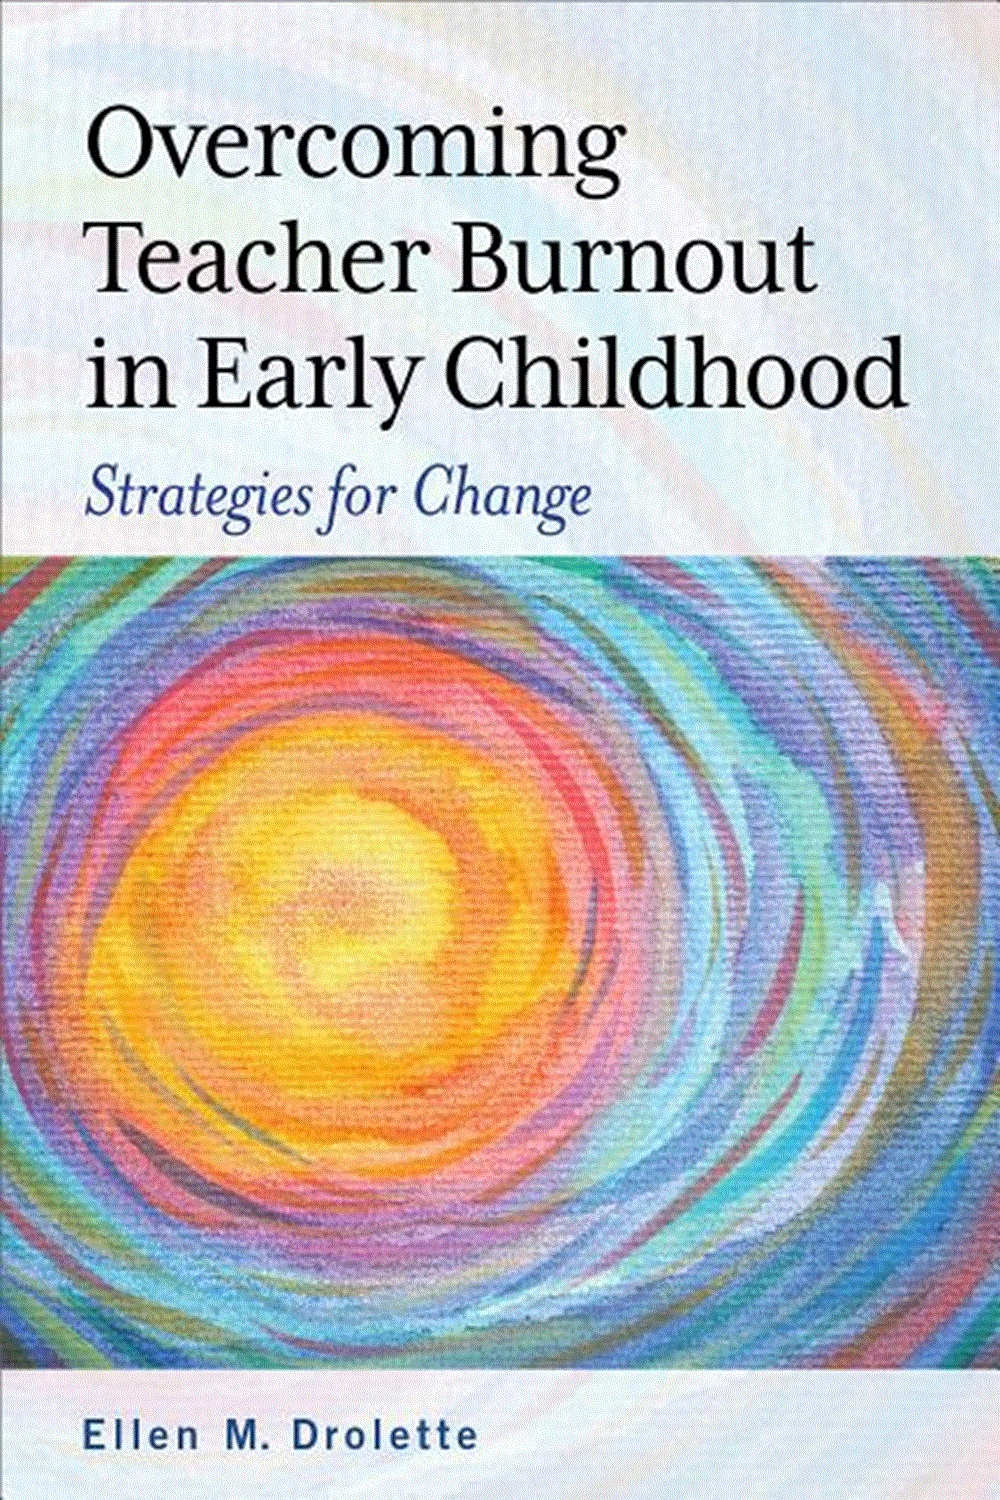 Overcoming Teacher Burnout in Early Childhood: Strategies for Change